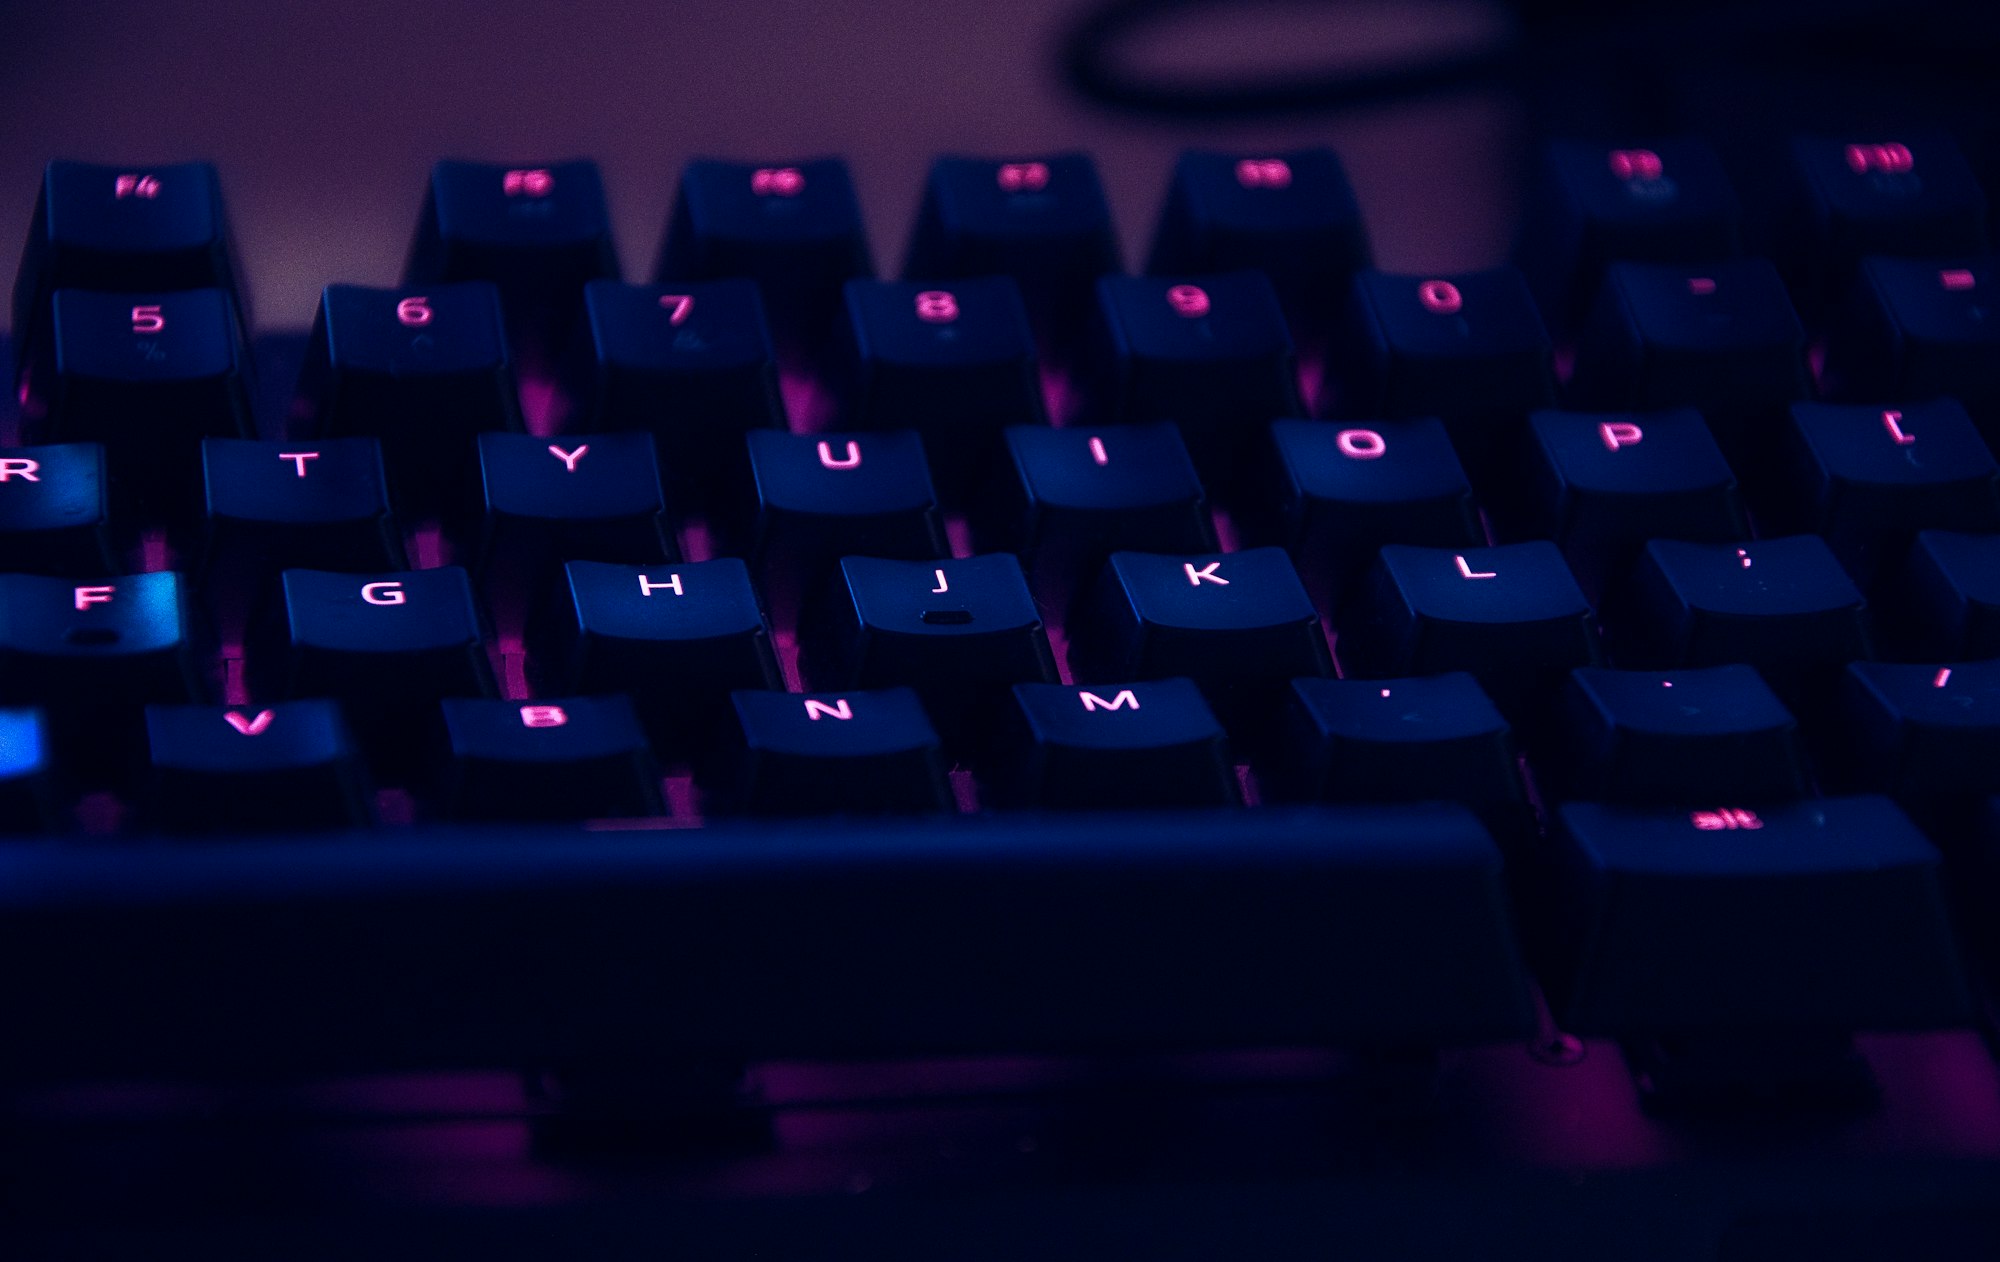 There is something about mechanical keyboards that makes sense to me, probably the feeling of progress with every click, the sound of it, the interaction, the satisfaction, simply love it.